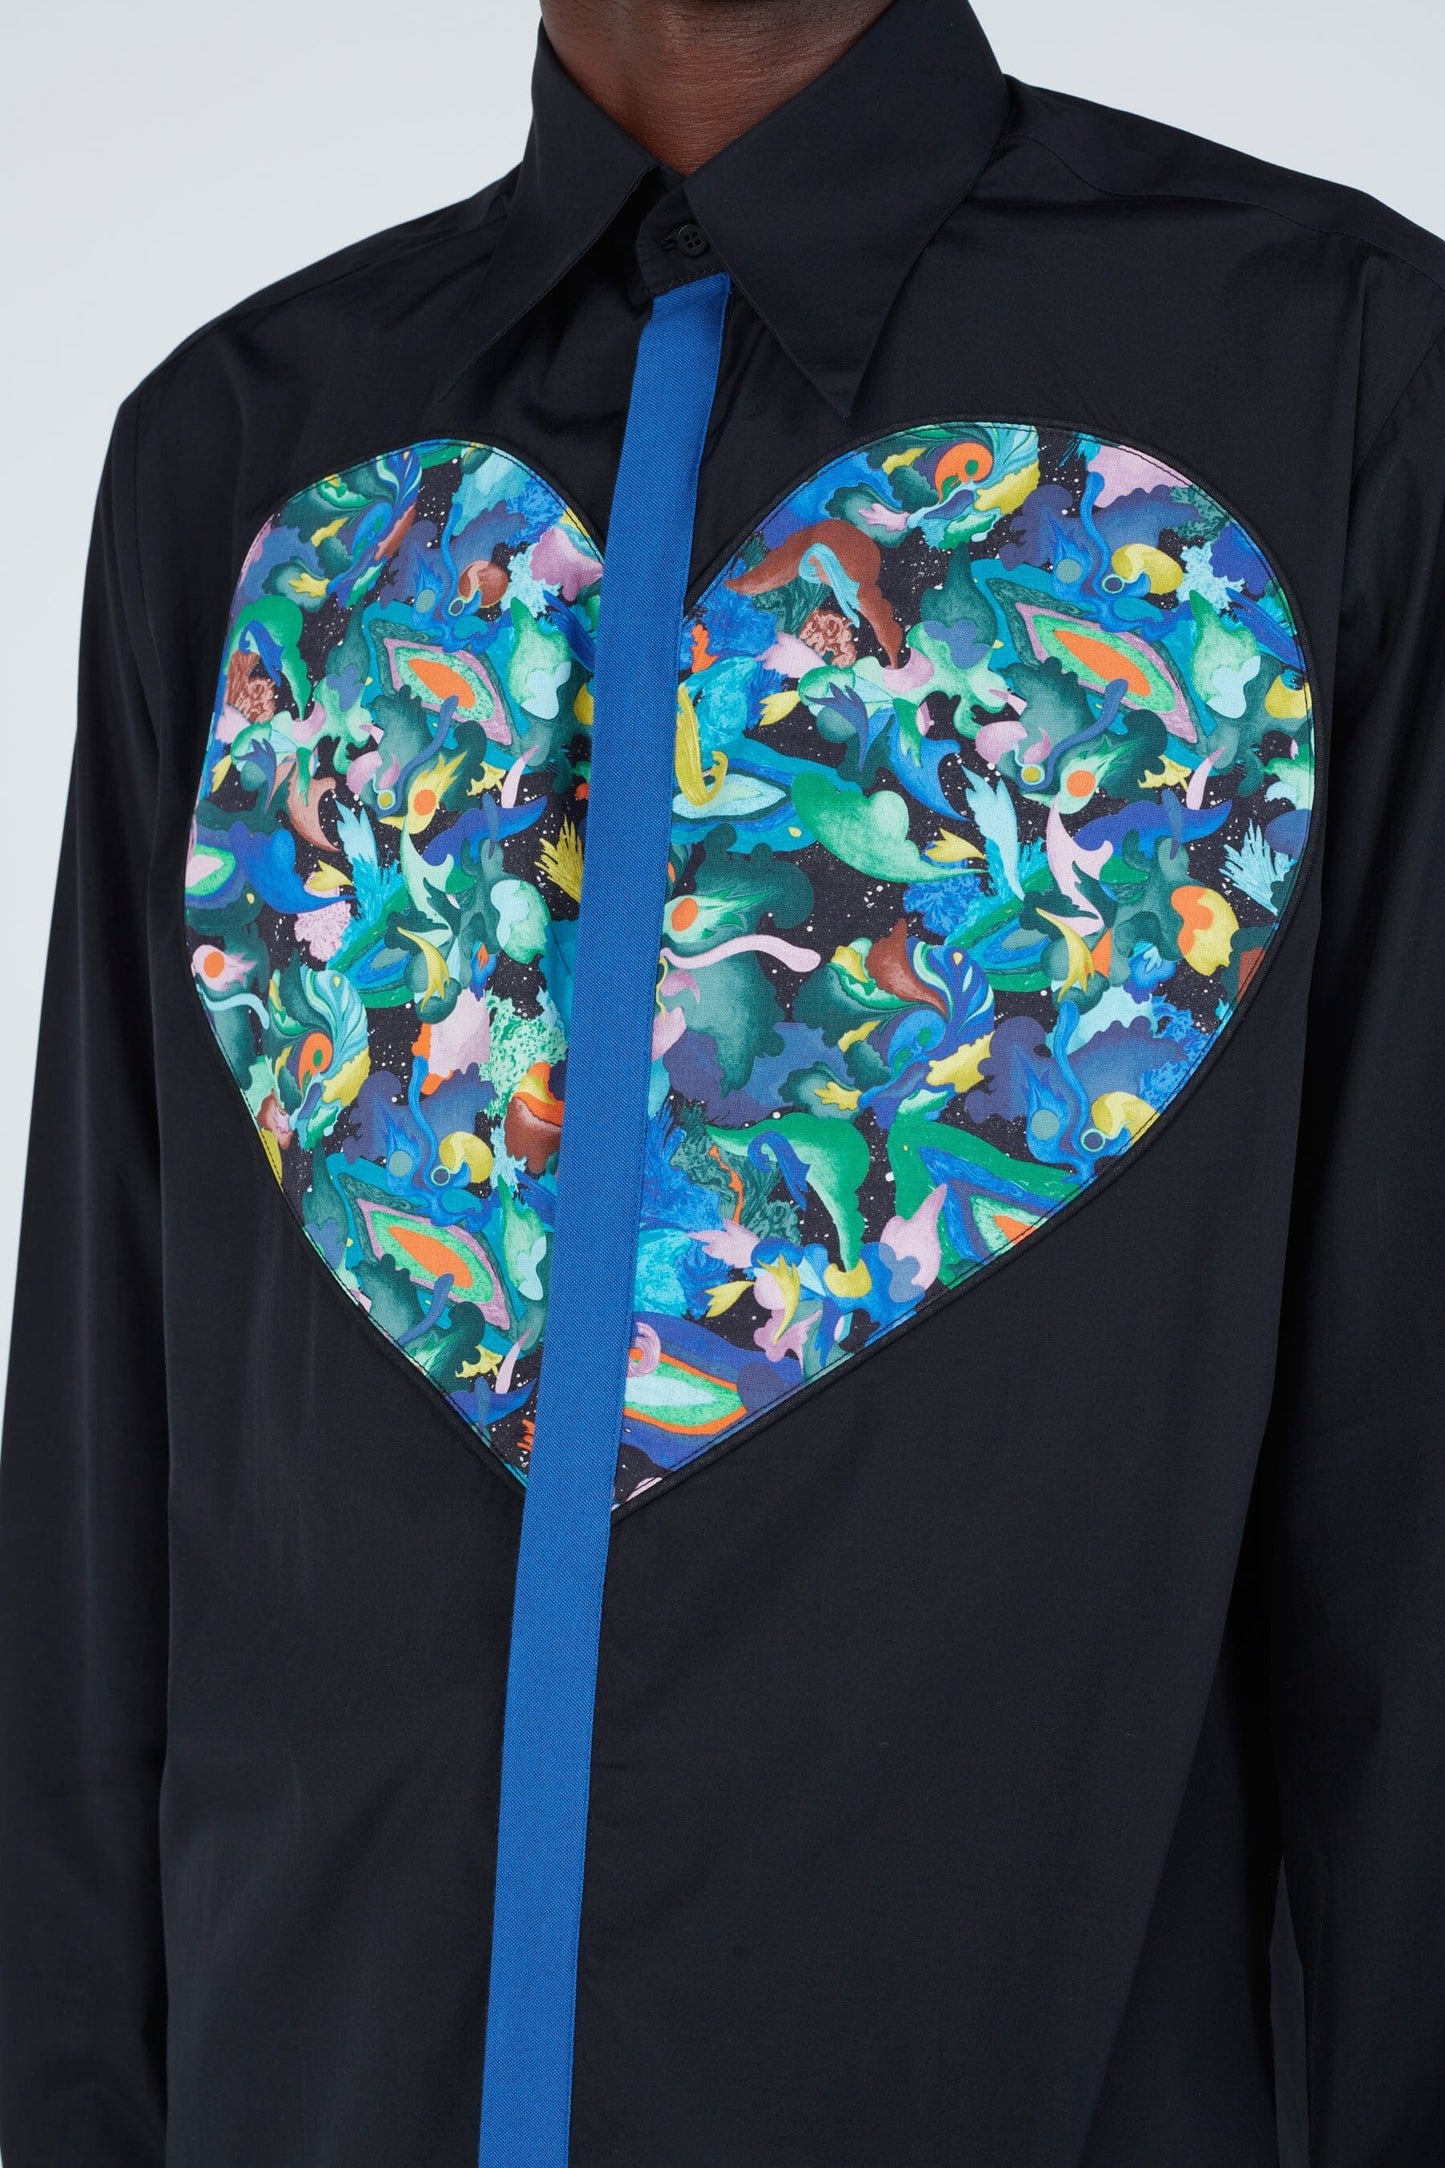 Modern Cosmic Heart Classic Shirt - Heart-Shaped Chest Panel and Cosmic Print